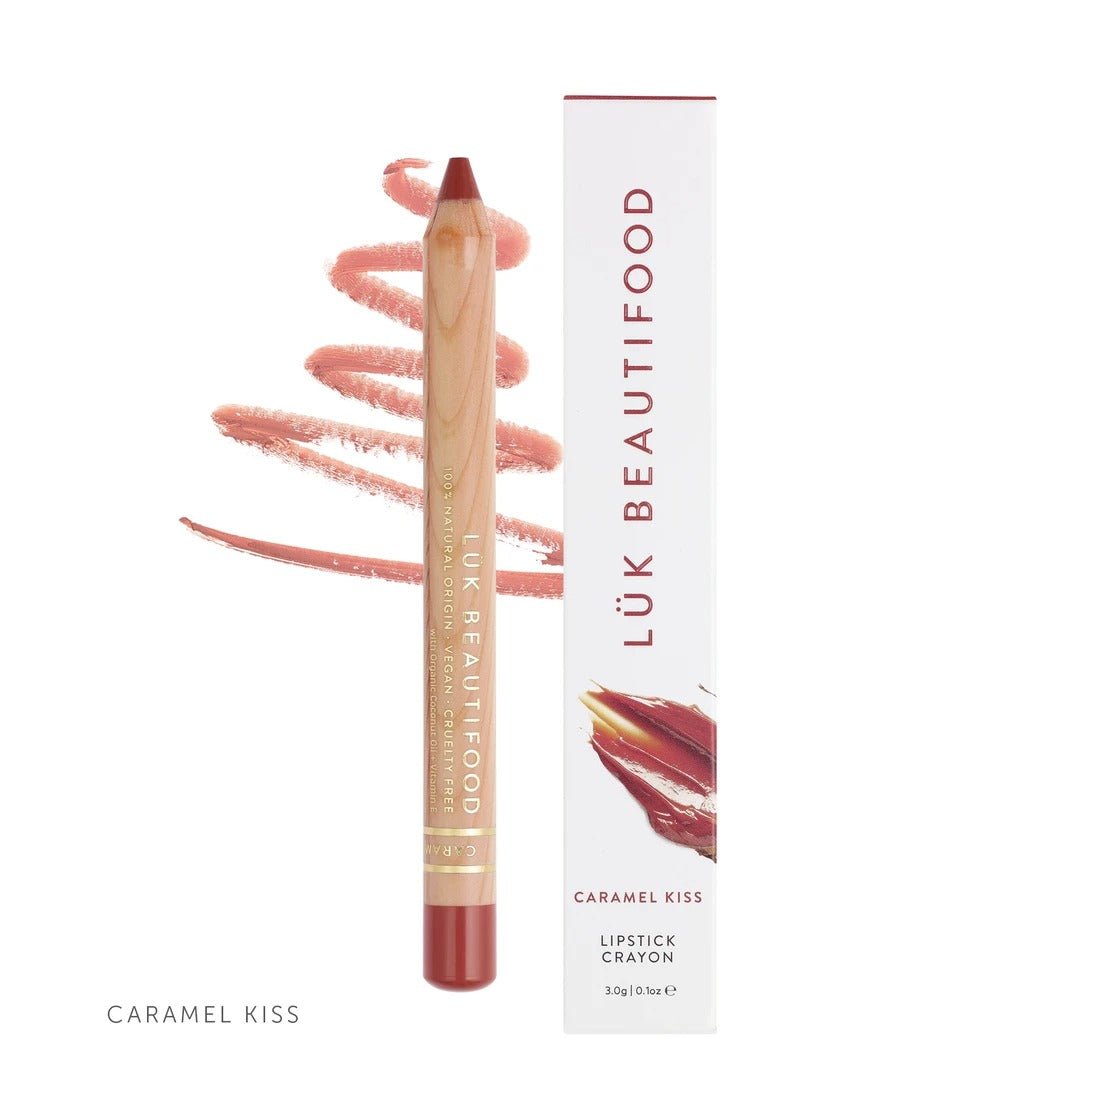 Luk BeautifoodLipstick Crayon Caramel Kiss #same day gift delivery melbourne#